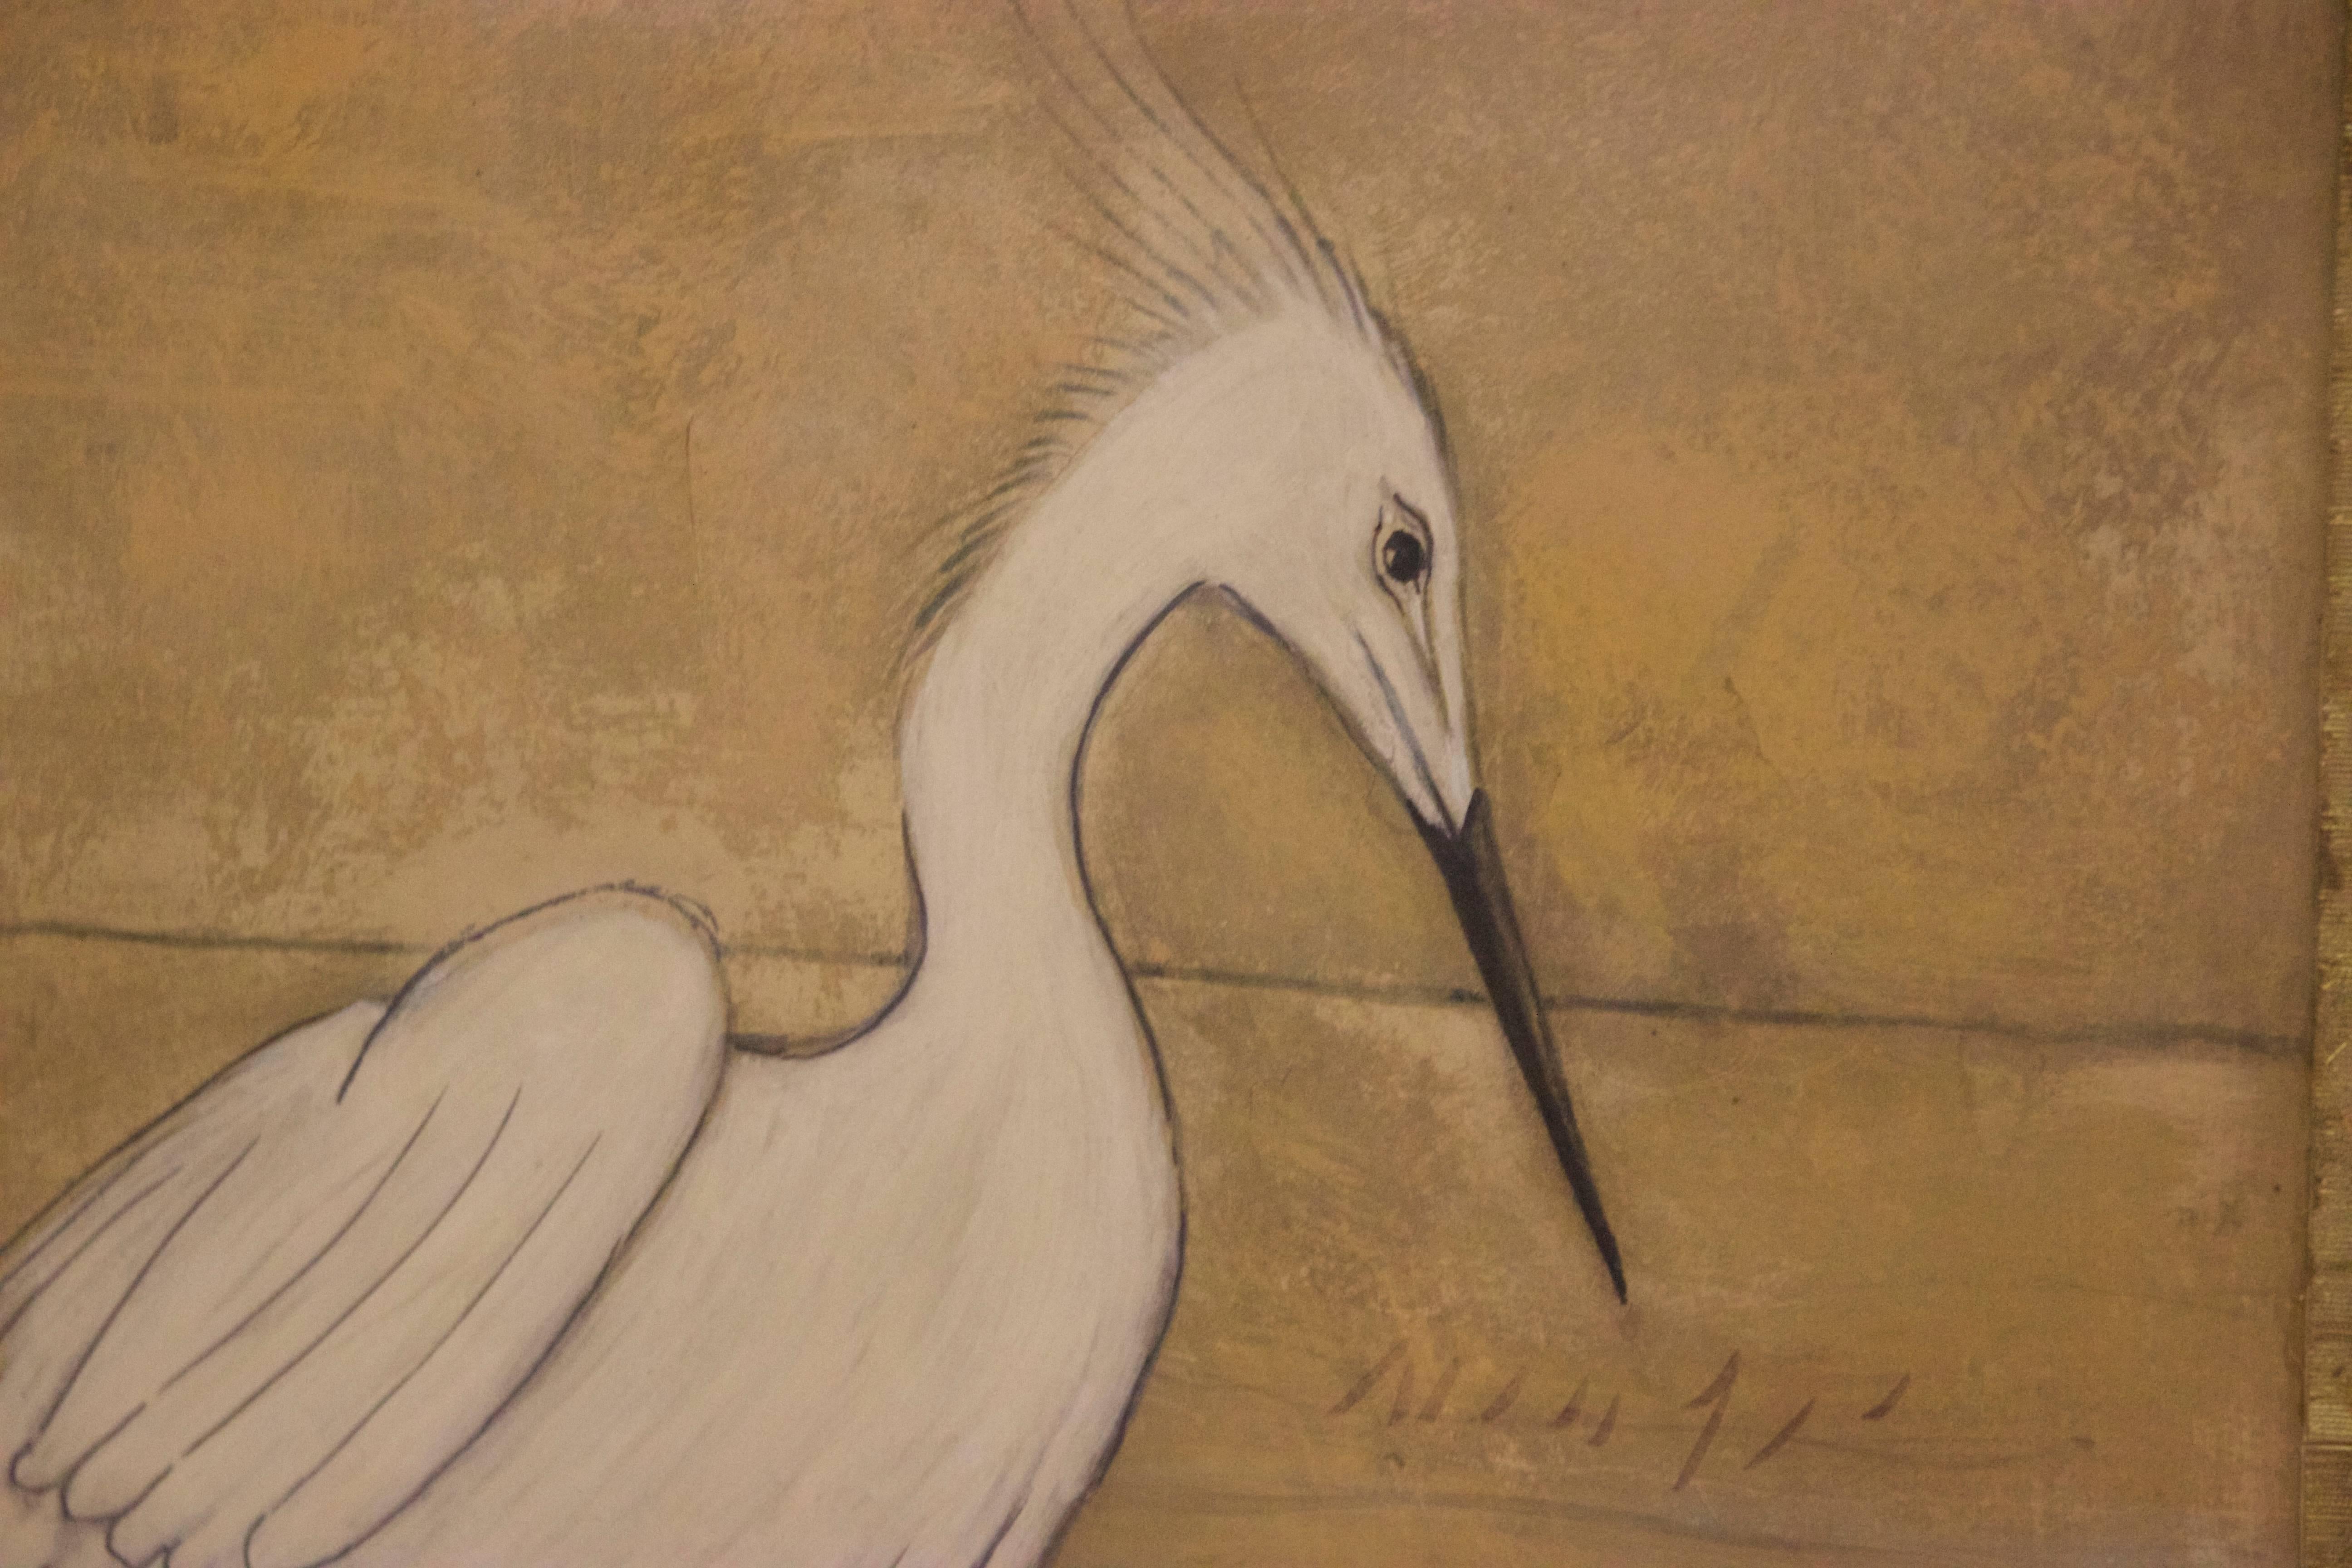 Four-Panel Screen Japan Decoration with Herons, Pencil and Gouache on Paper 4